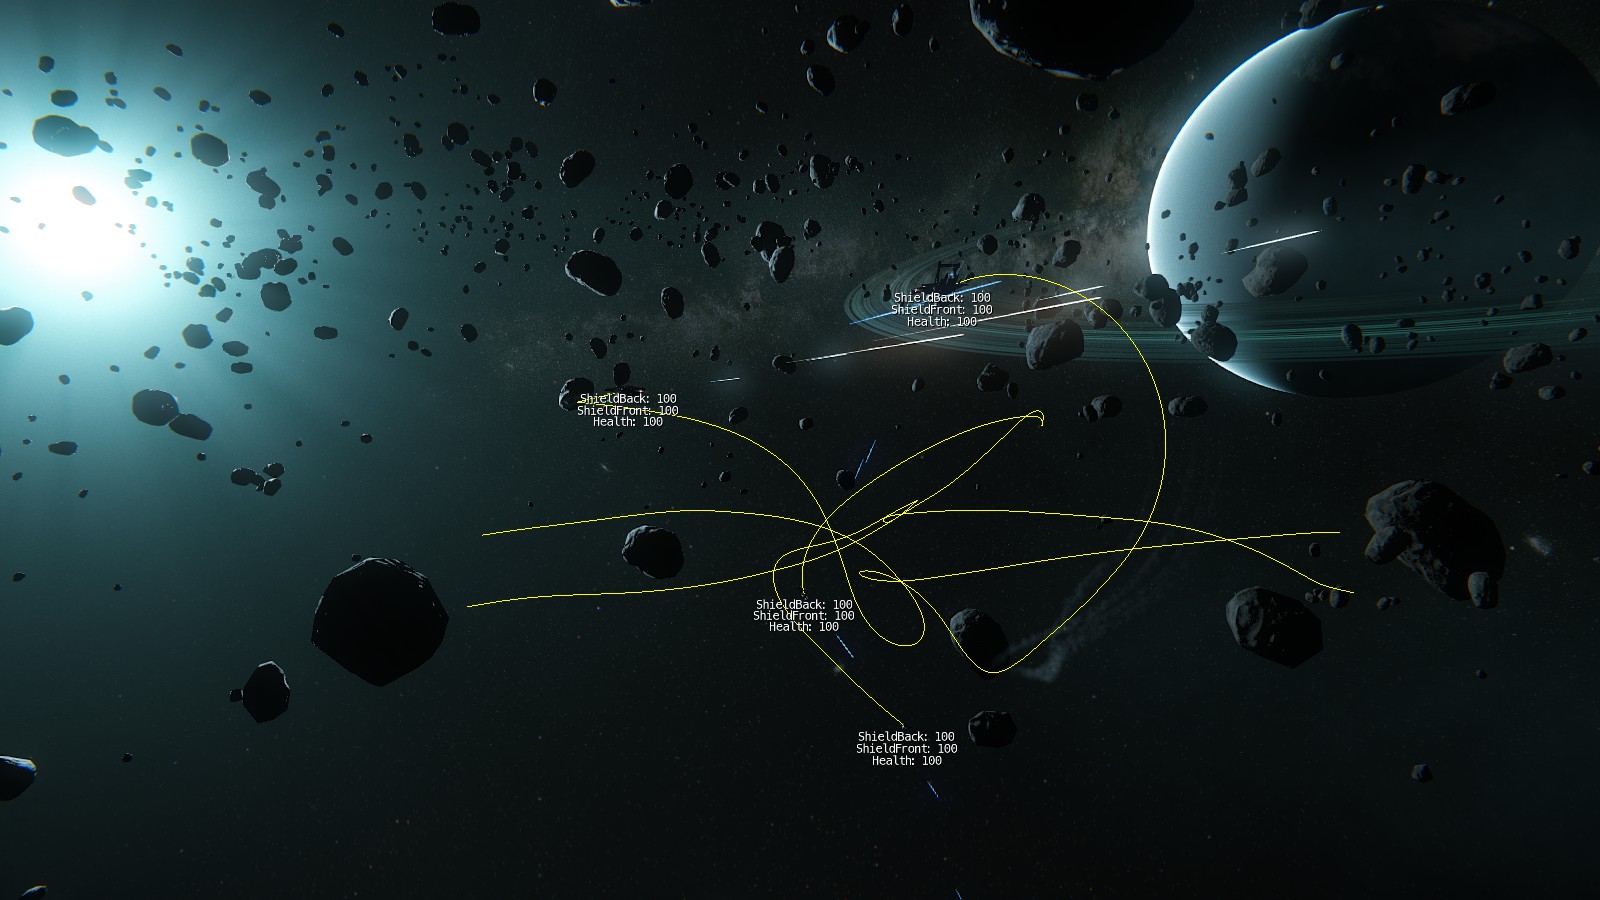 Star Citizen's Dog Fighting module is now available